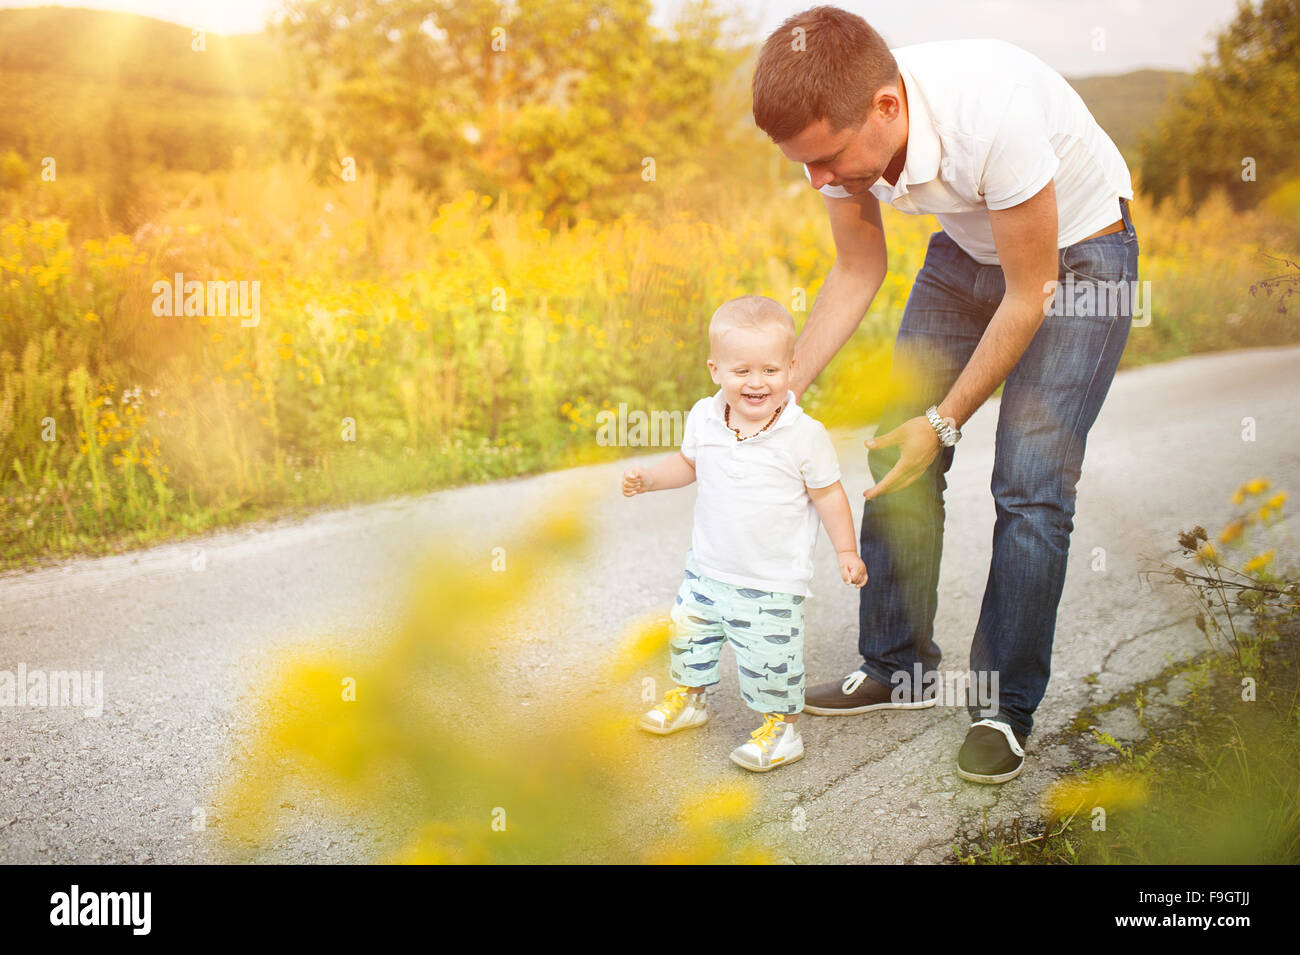 Father and son on a walk in nature enjoying life together. Stock Photo